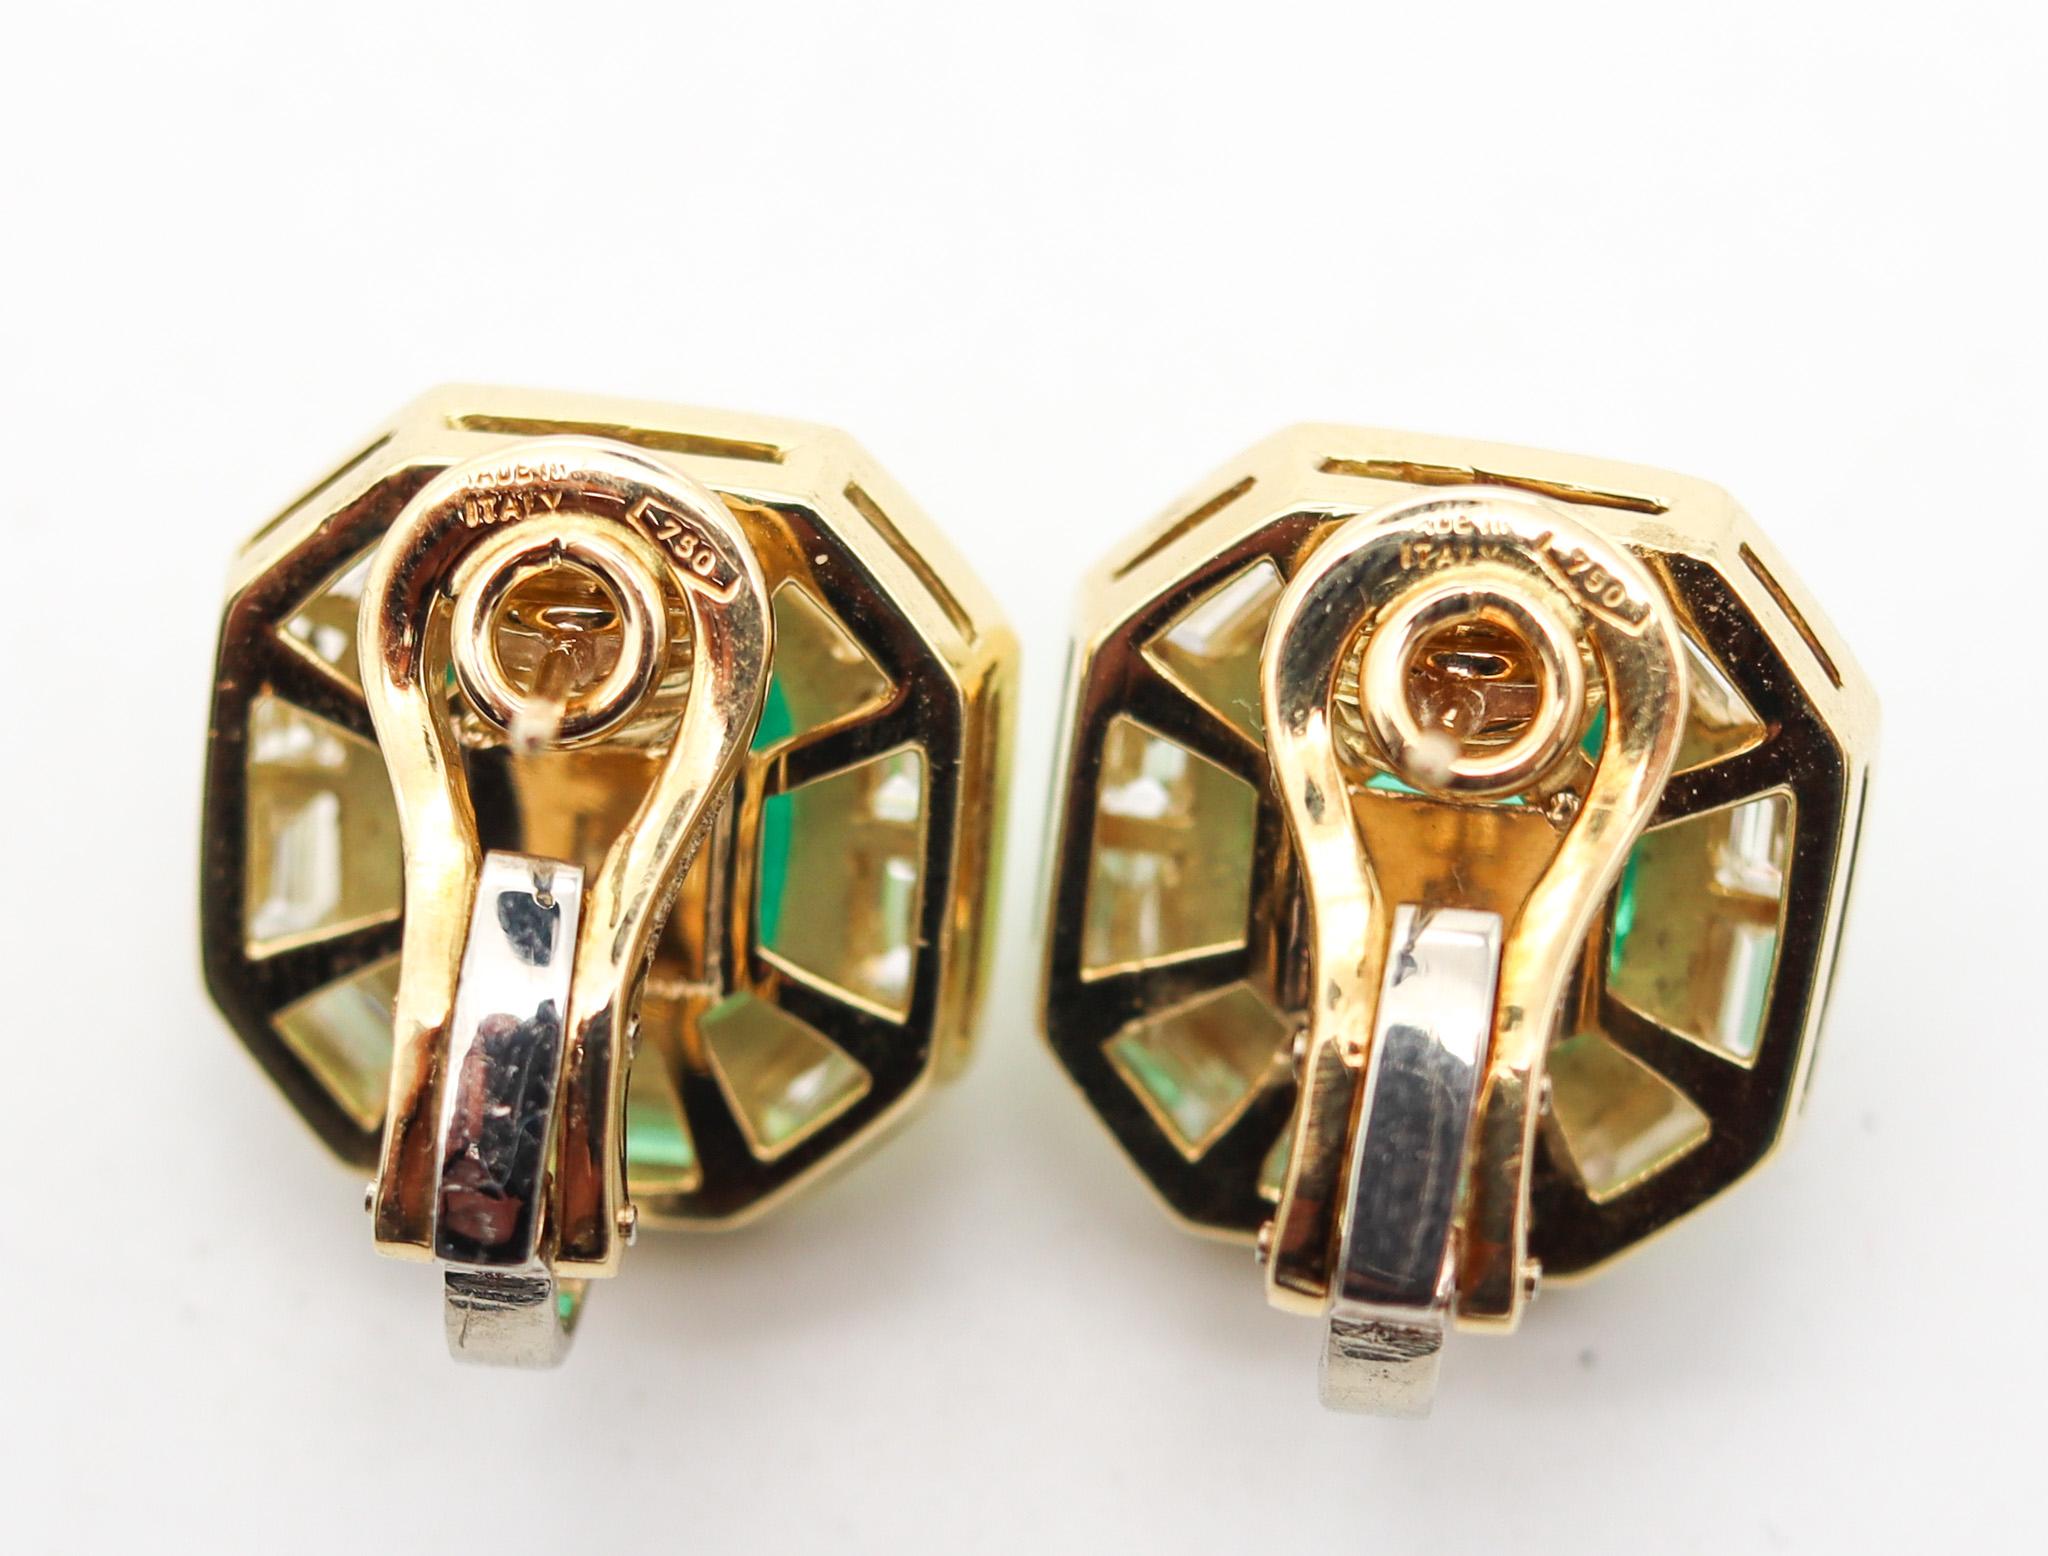 Emerald Cut Bvlgari Clip On Earrings In 18Kt Gold With 11.72 Ctw In Diamonds And Emeralds